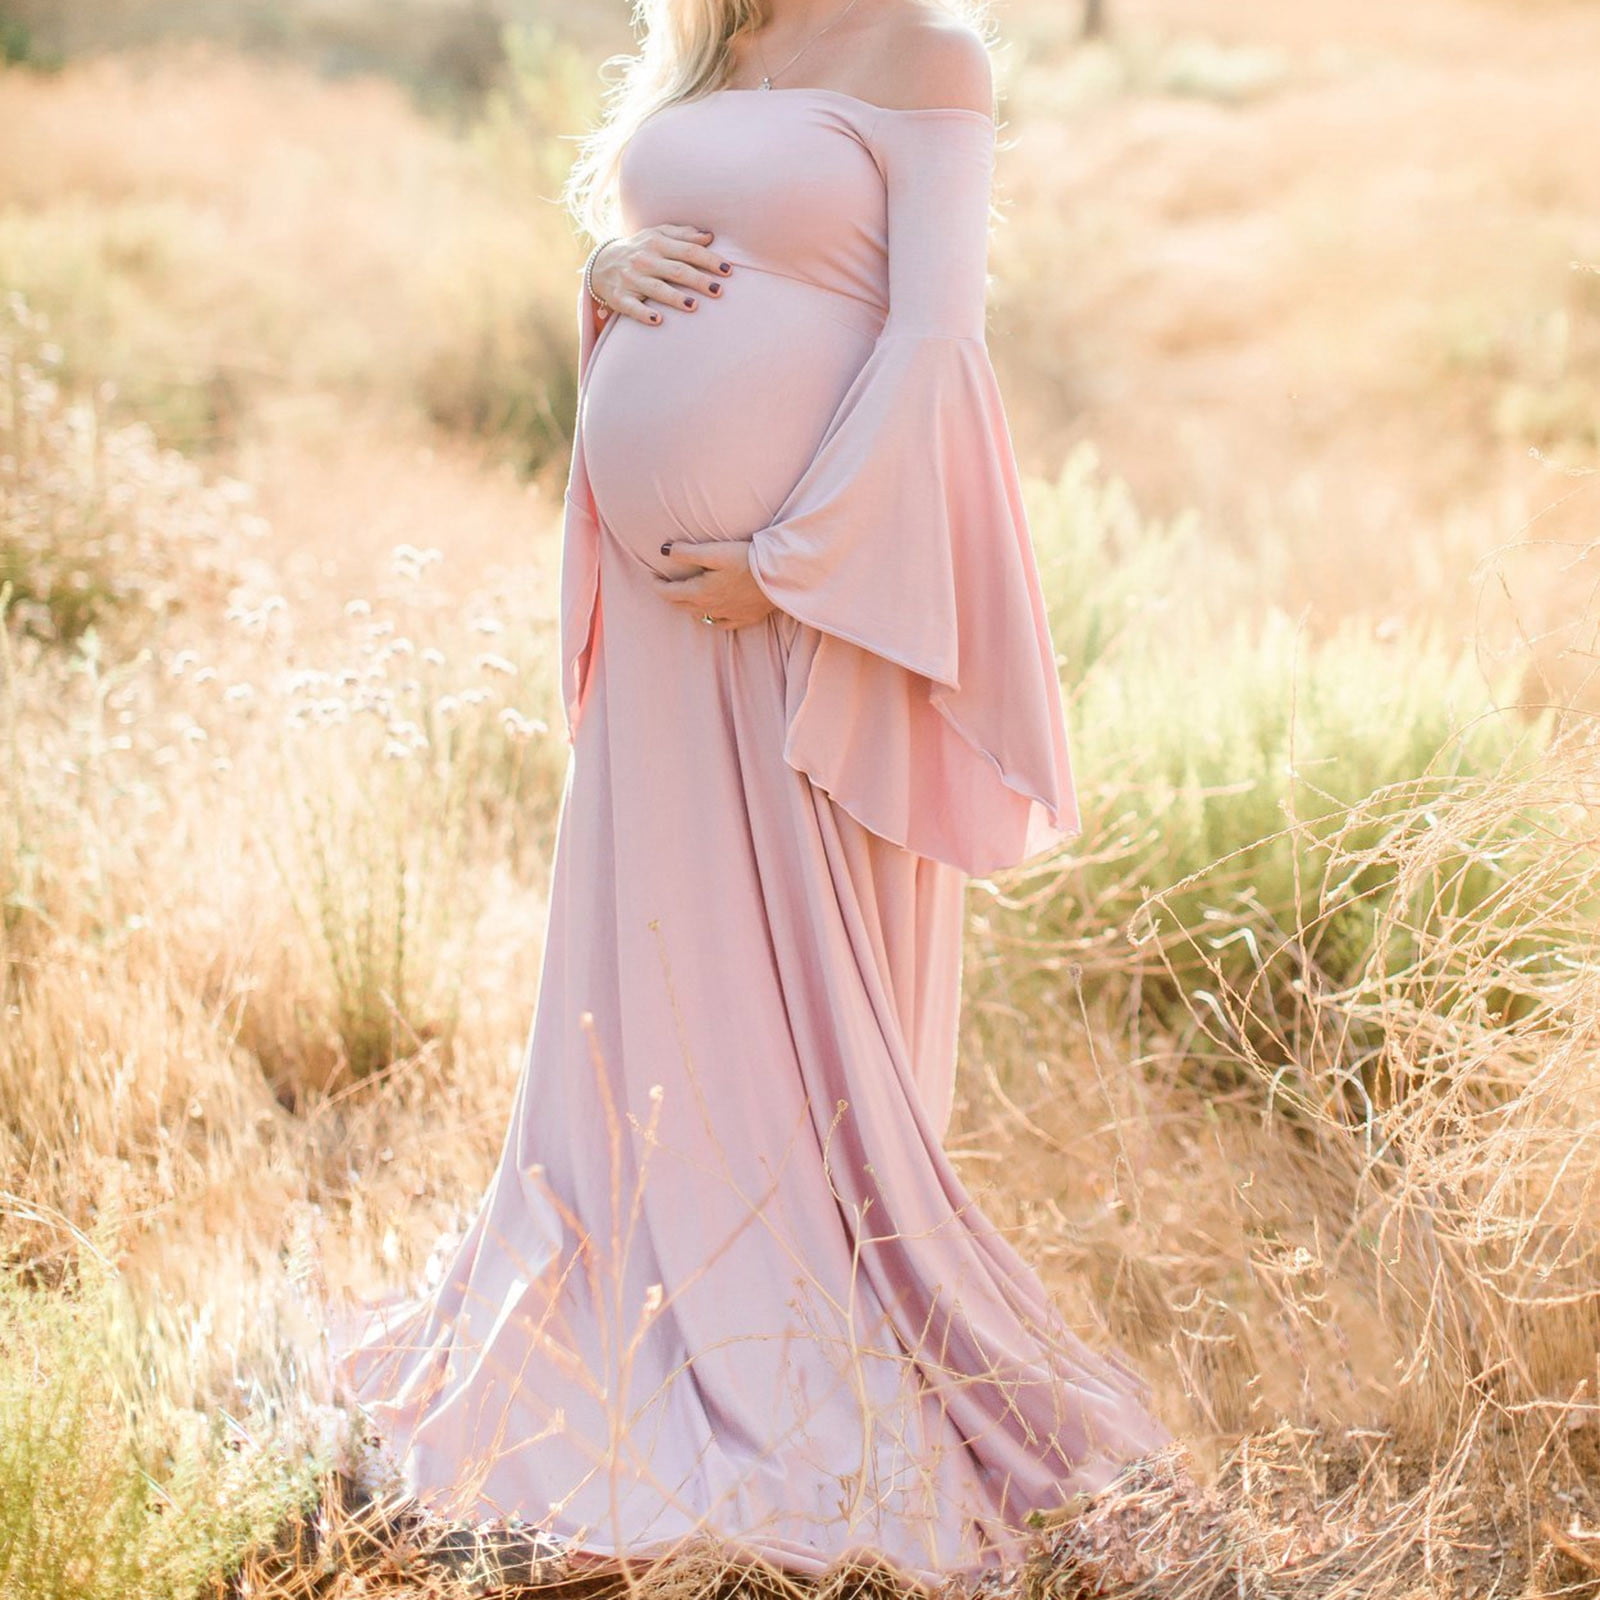 Petite Maternity Dresses for Short & Small Pregnant Mothers